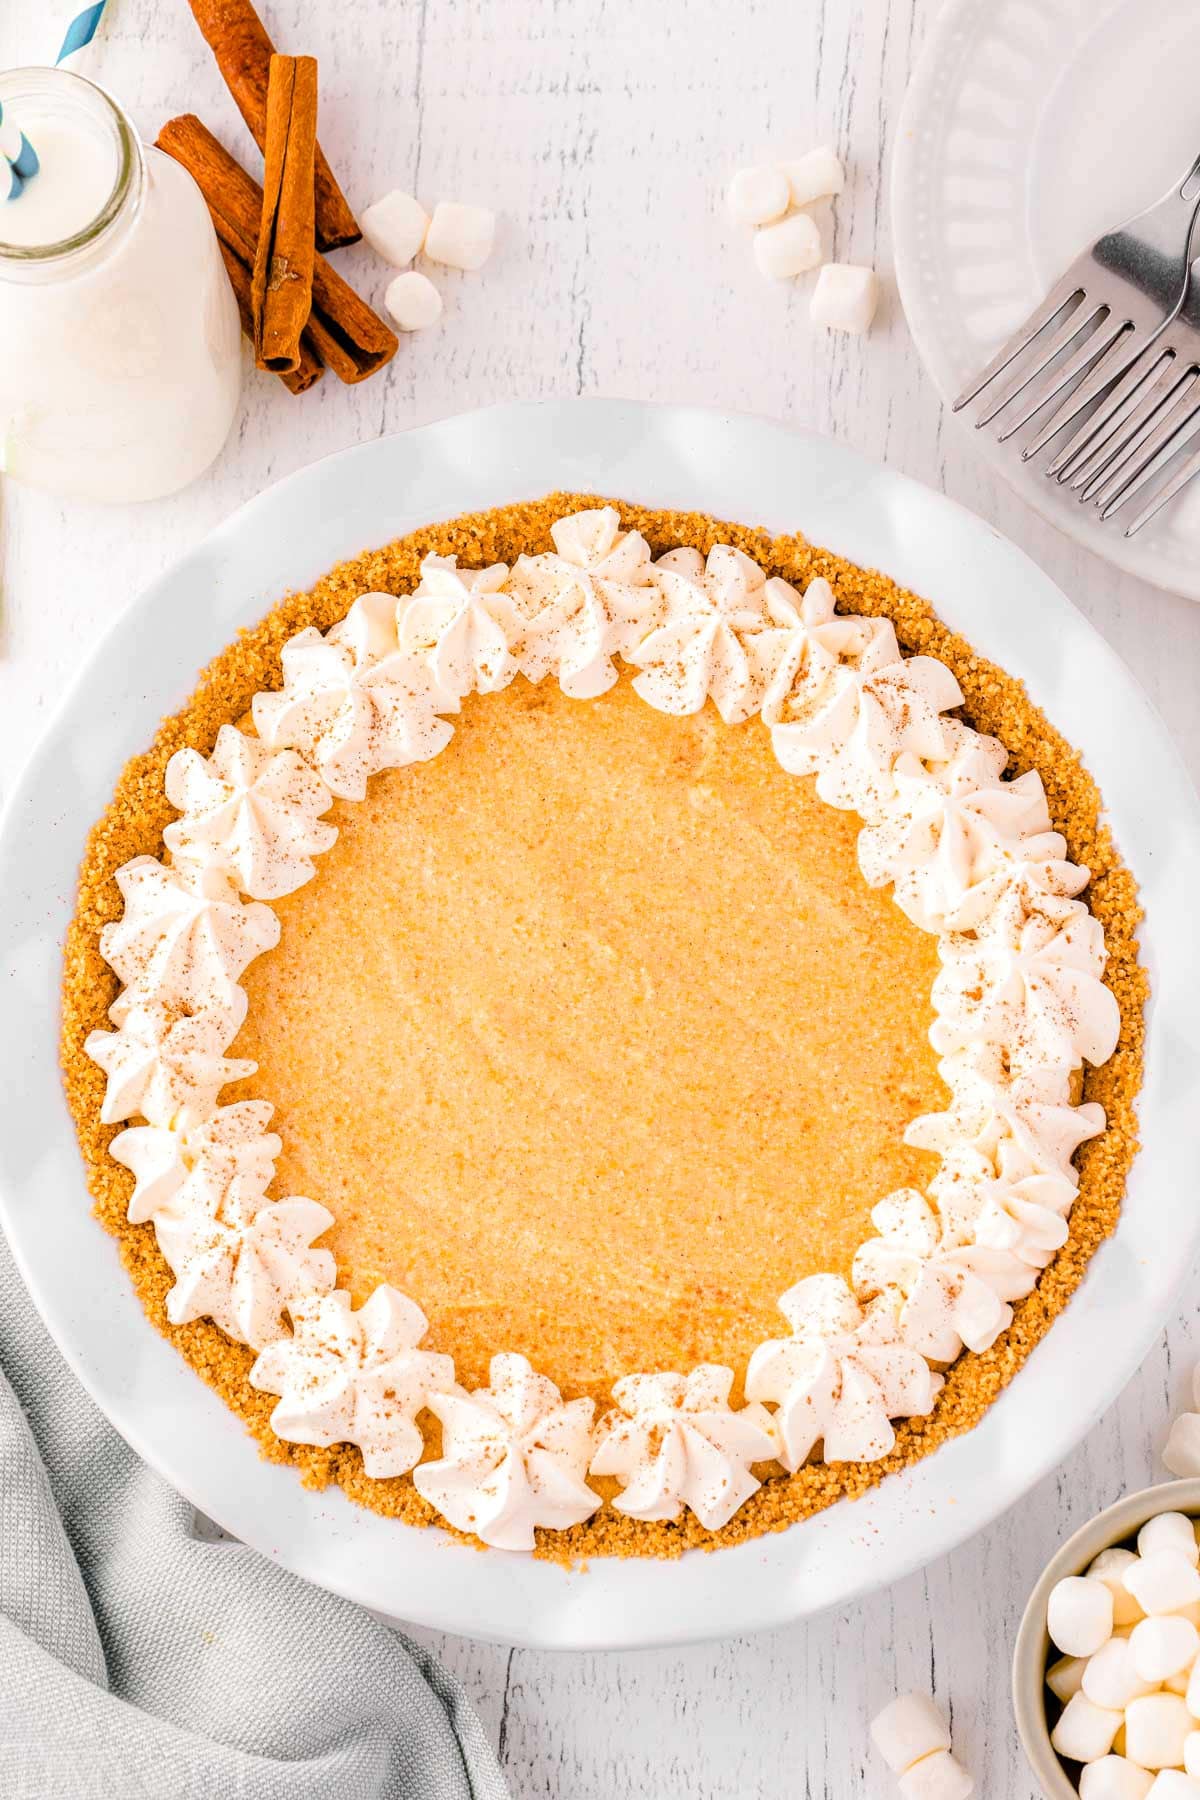 top down view of whole no bake pumpkin pie sitting on marble surface next to cinnamon sticks.